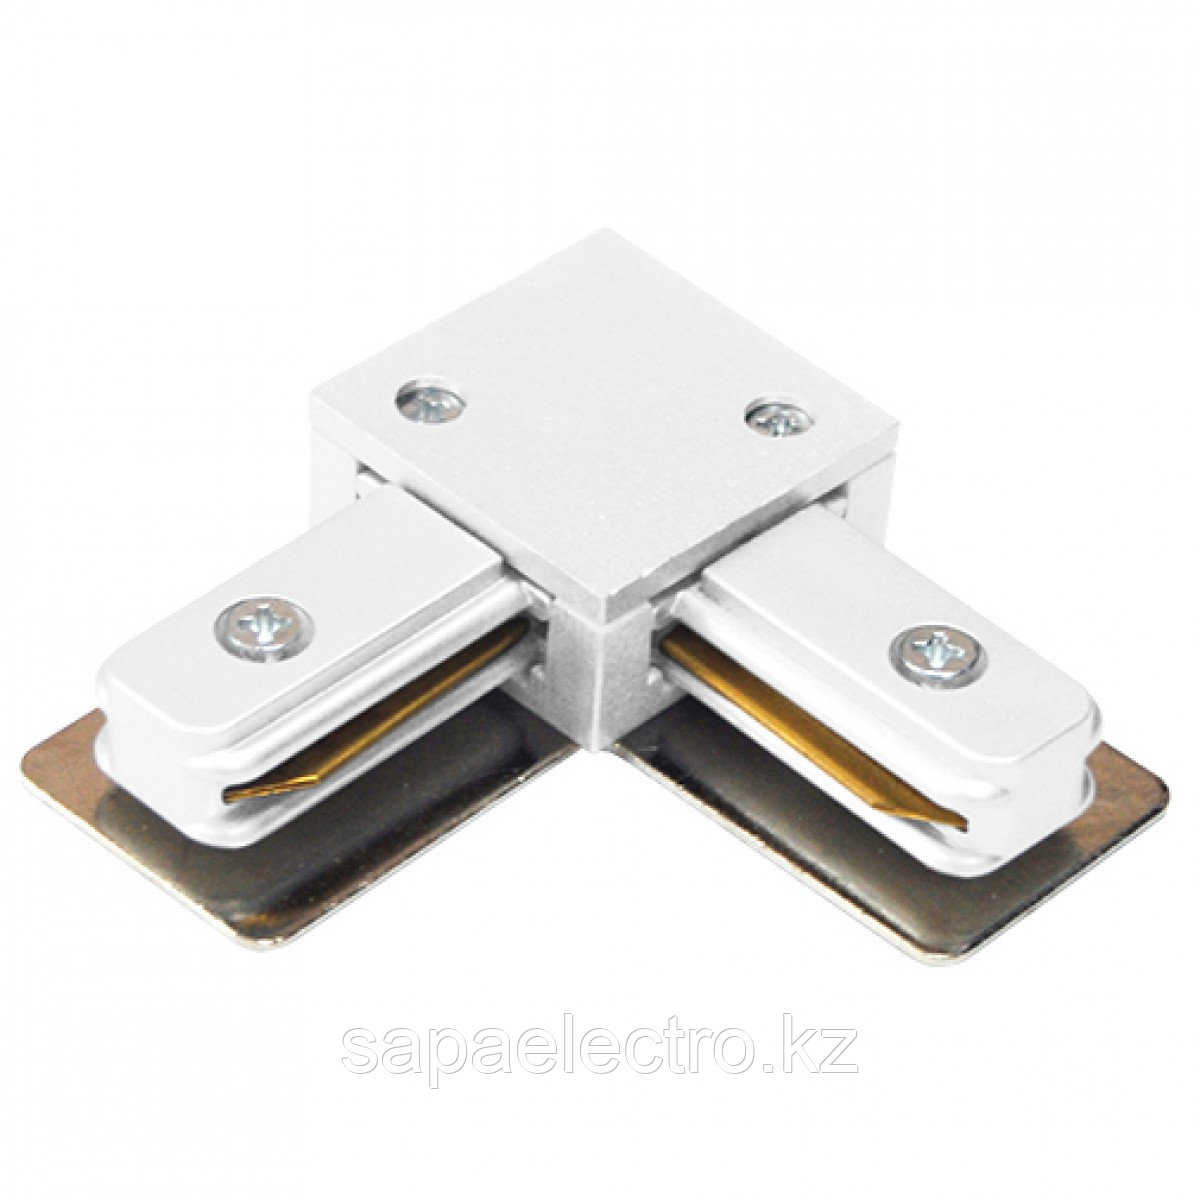 WHITE STANDART L-CONNECTOR (2 LINE) (TS)100шт